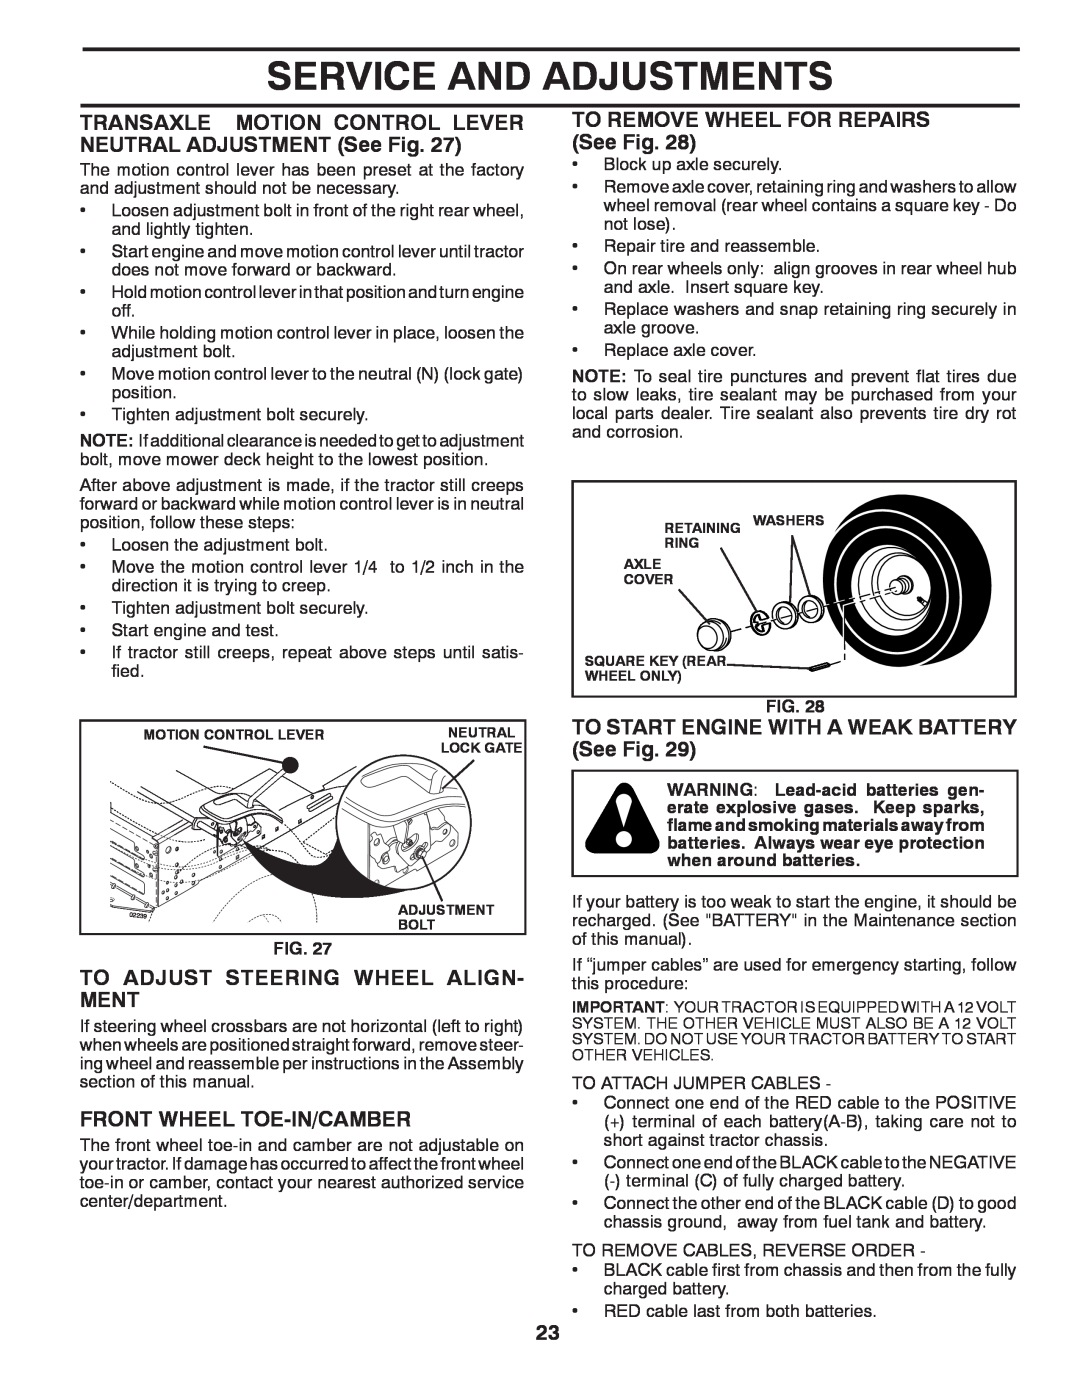 Poulan 418769, 96042004700 manual Service And Adjustments, TRANSAXLE MOTION CONTROL LEVER NEUTRAL ADJUSTMENT See Fig 